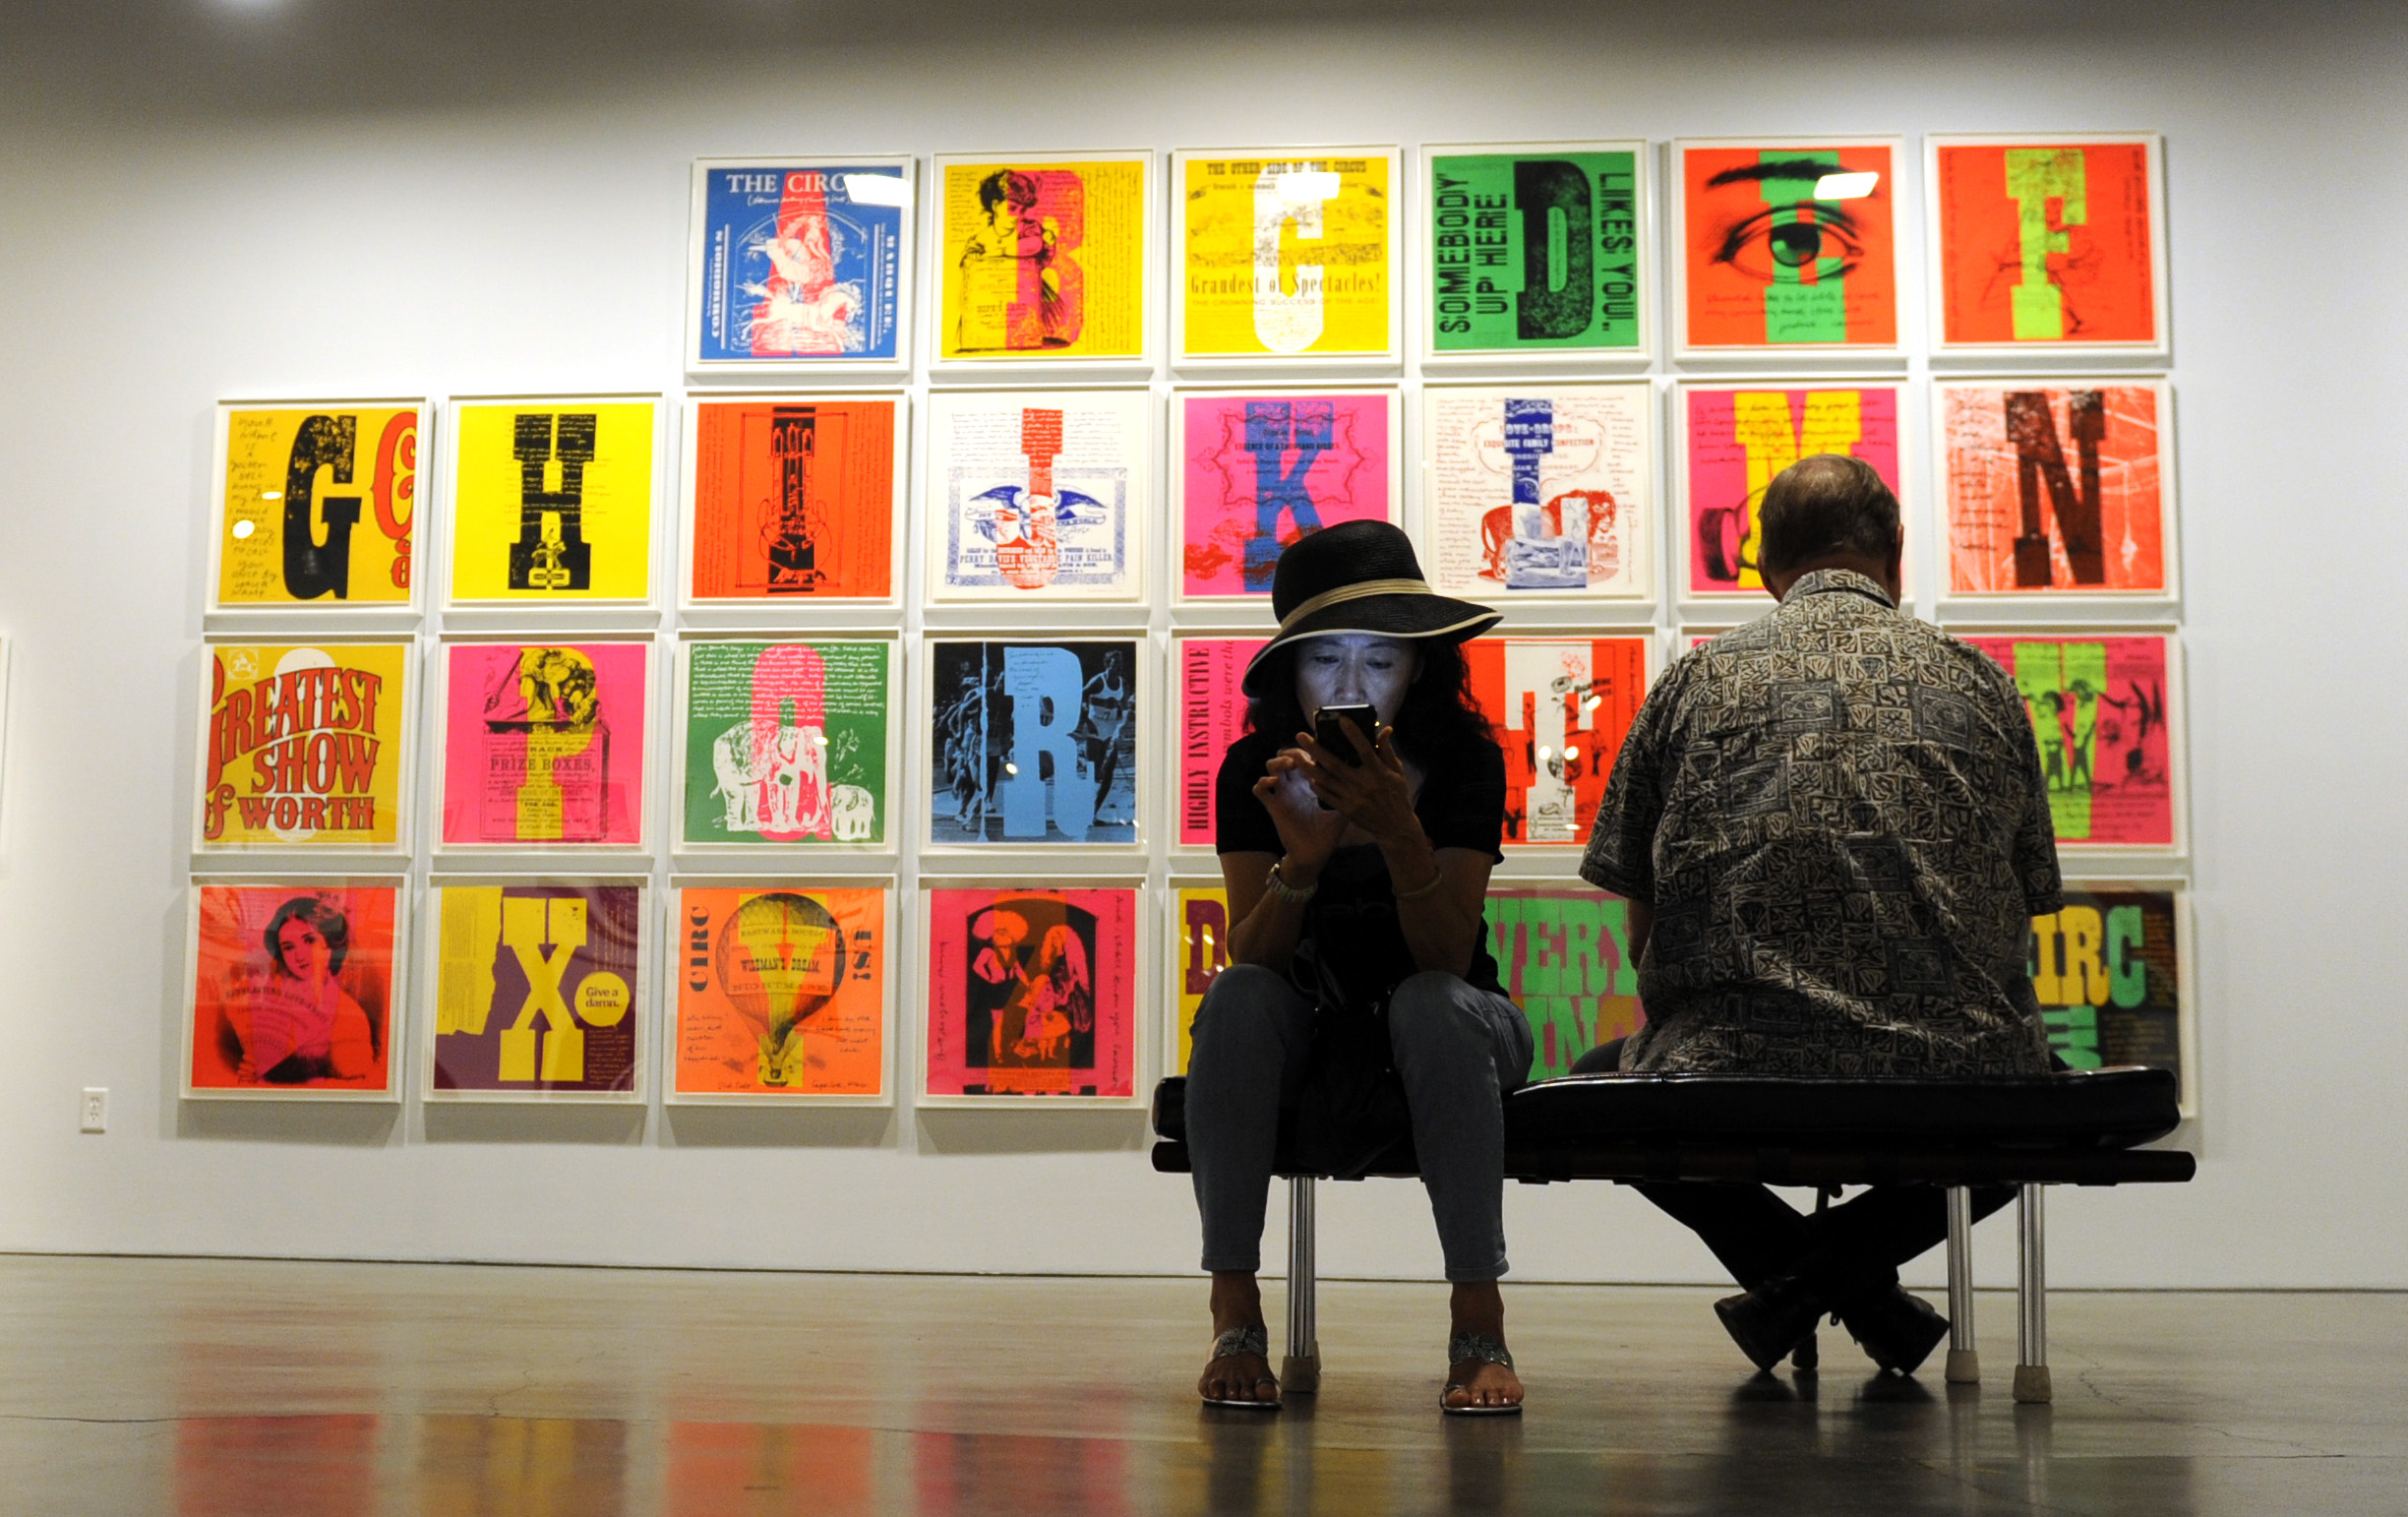  Glory Huang, left, looks at her phone during a docent tour of "Someday is Now: The Art of Corita Kent" at the Pasadena Museum of California Art on Saturday, July 11, 2015 in Pasadena, Calif. 


  